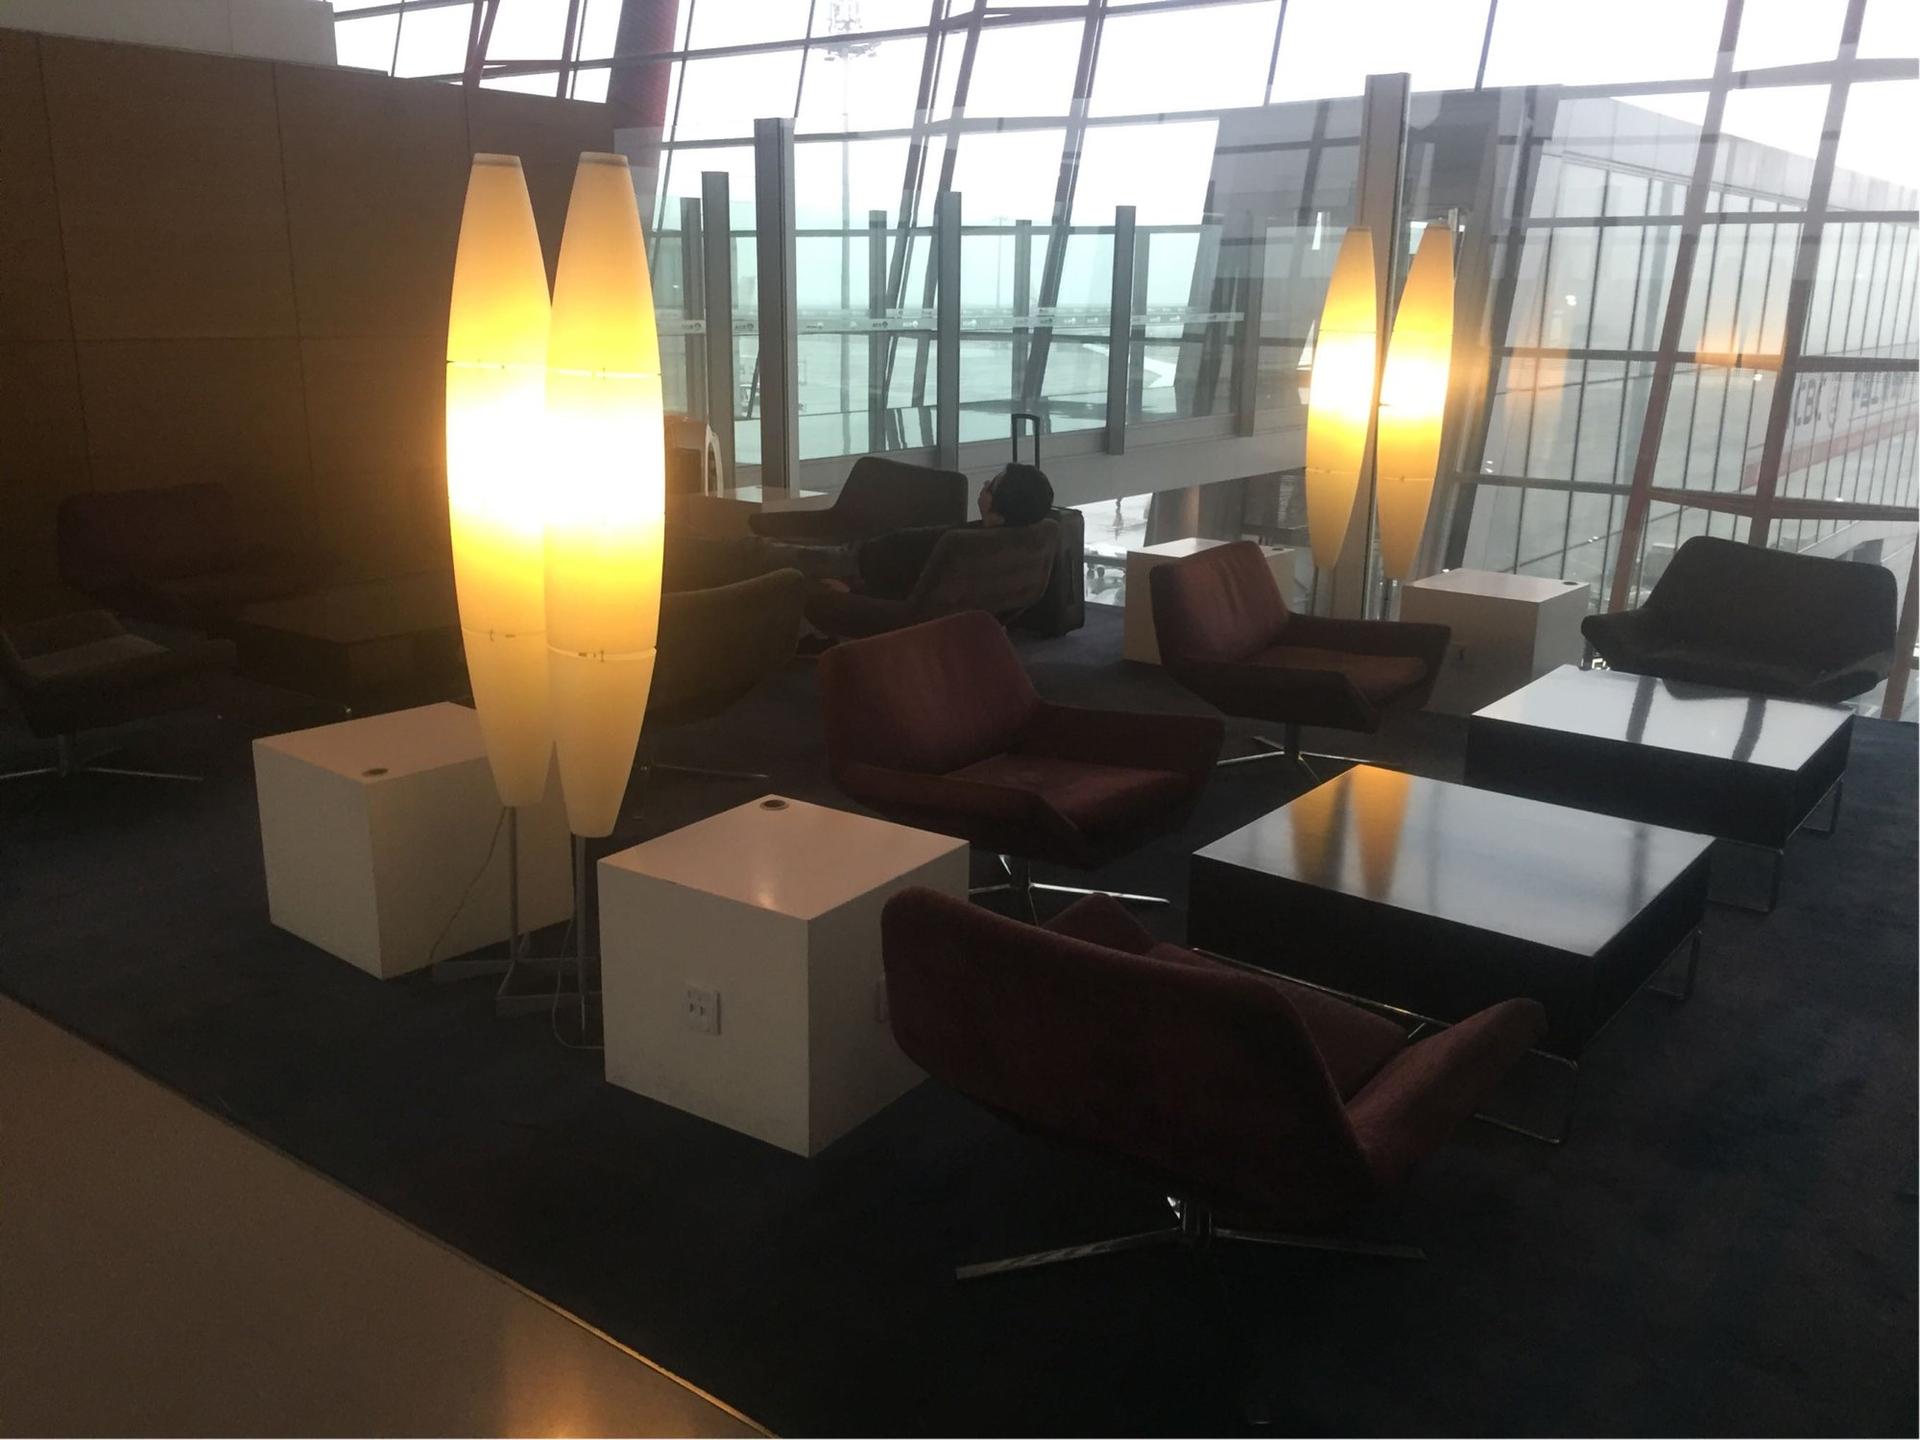 Cathay Pacific Lounge image 12 of 17